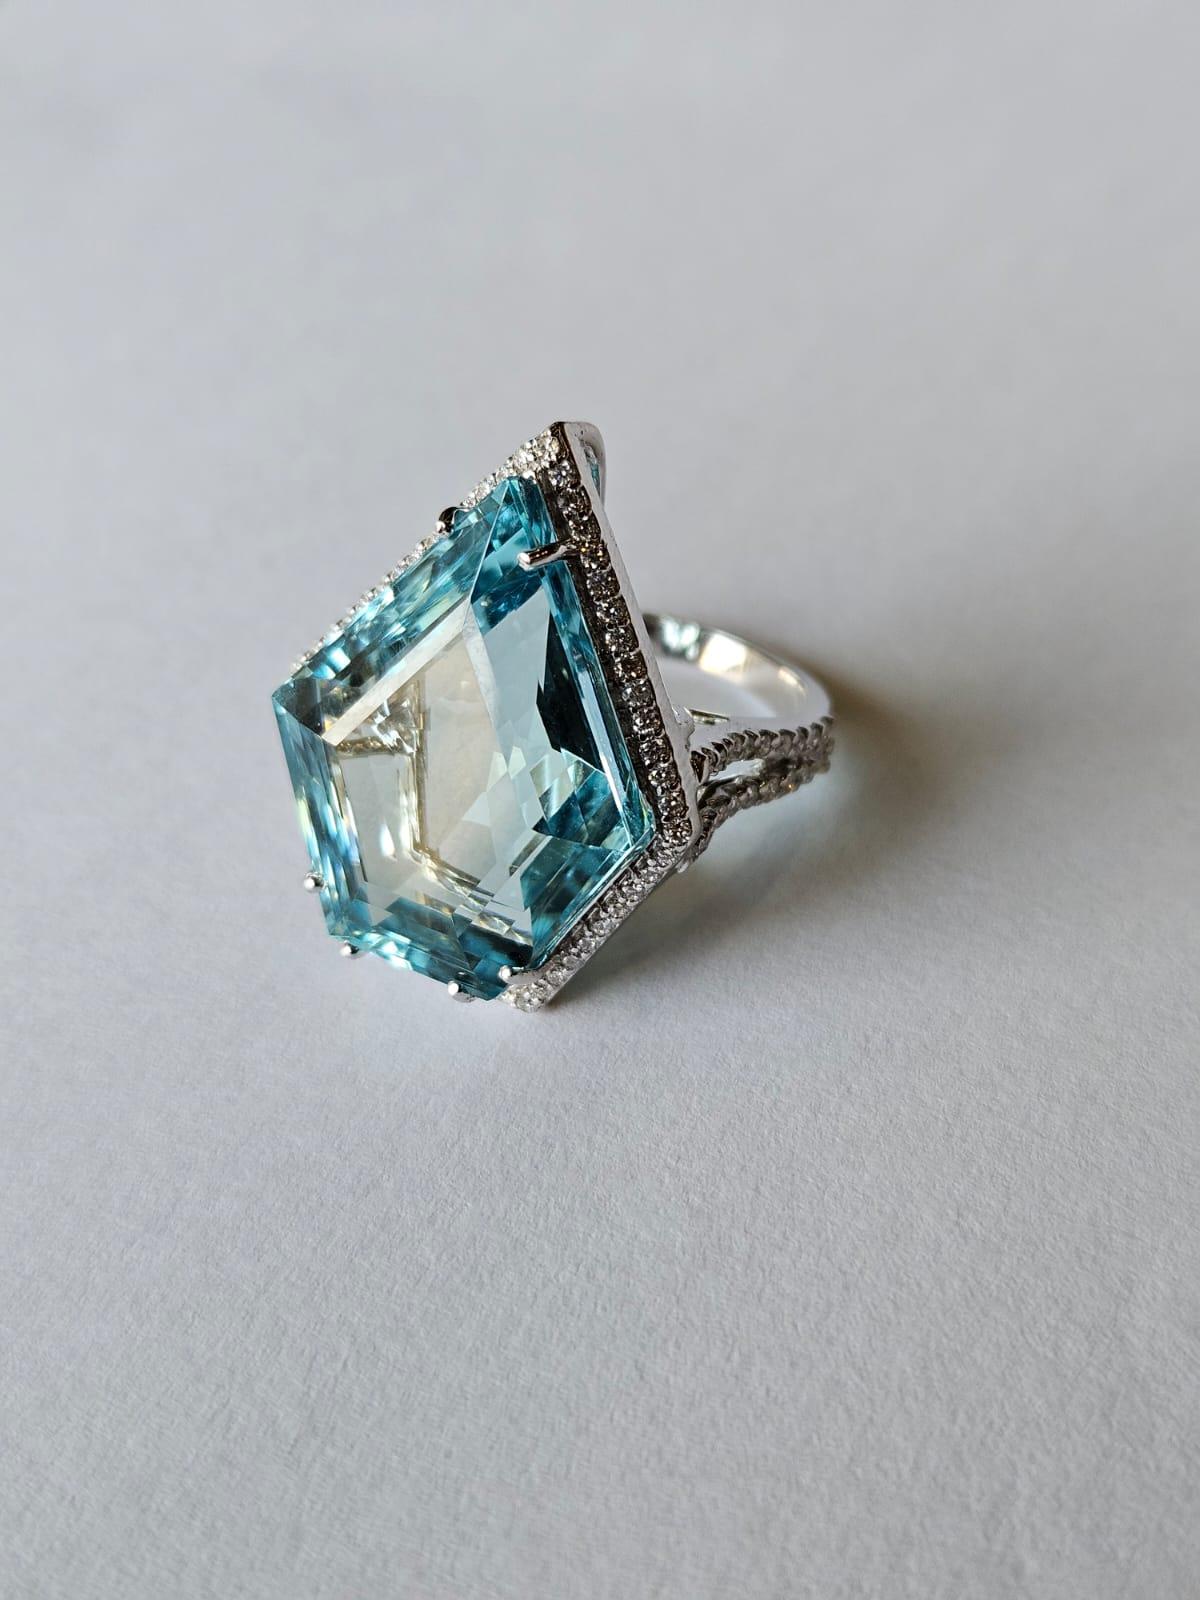 Shield Cut Set in 18K White Gold, 26.81 carats, Aquamarine & Diamonds Cocktail Ring For Sale